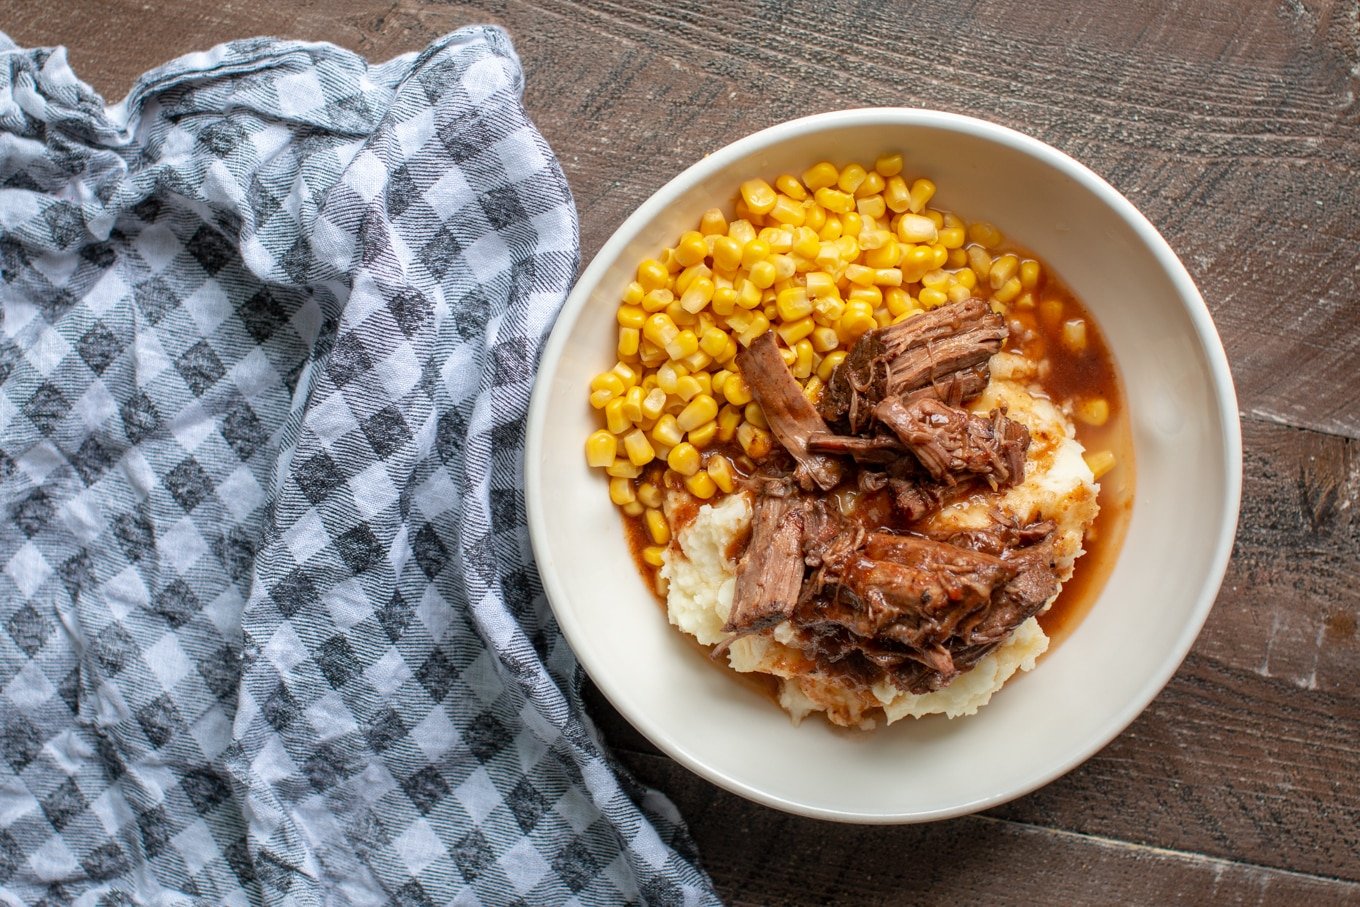 shredded beef and sauce on top of mashed potatoes with corn on the side.